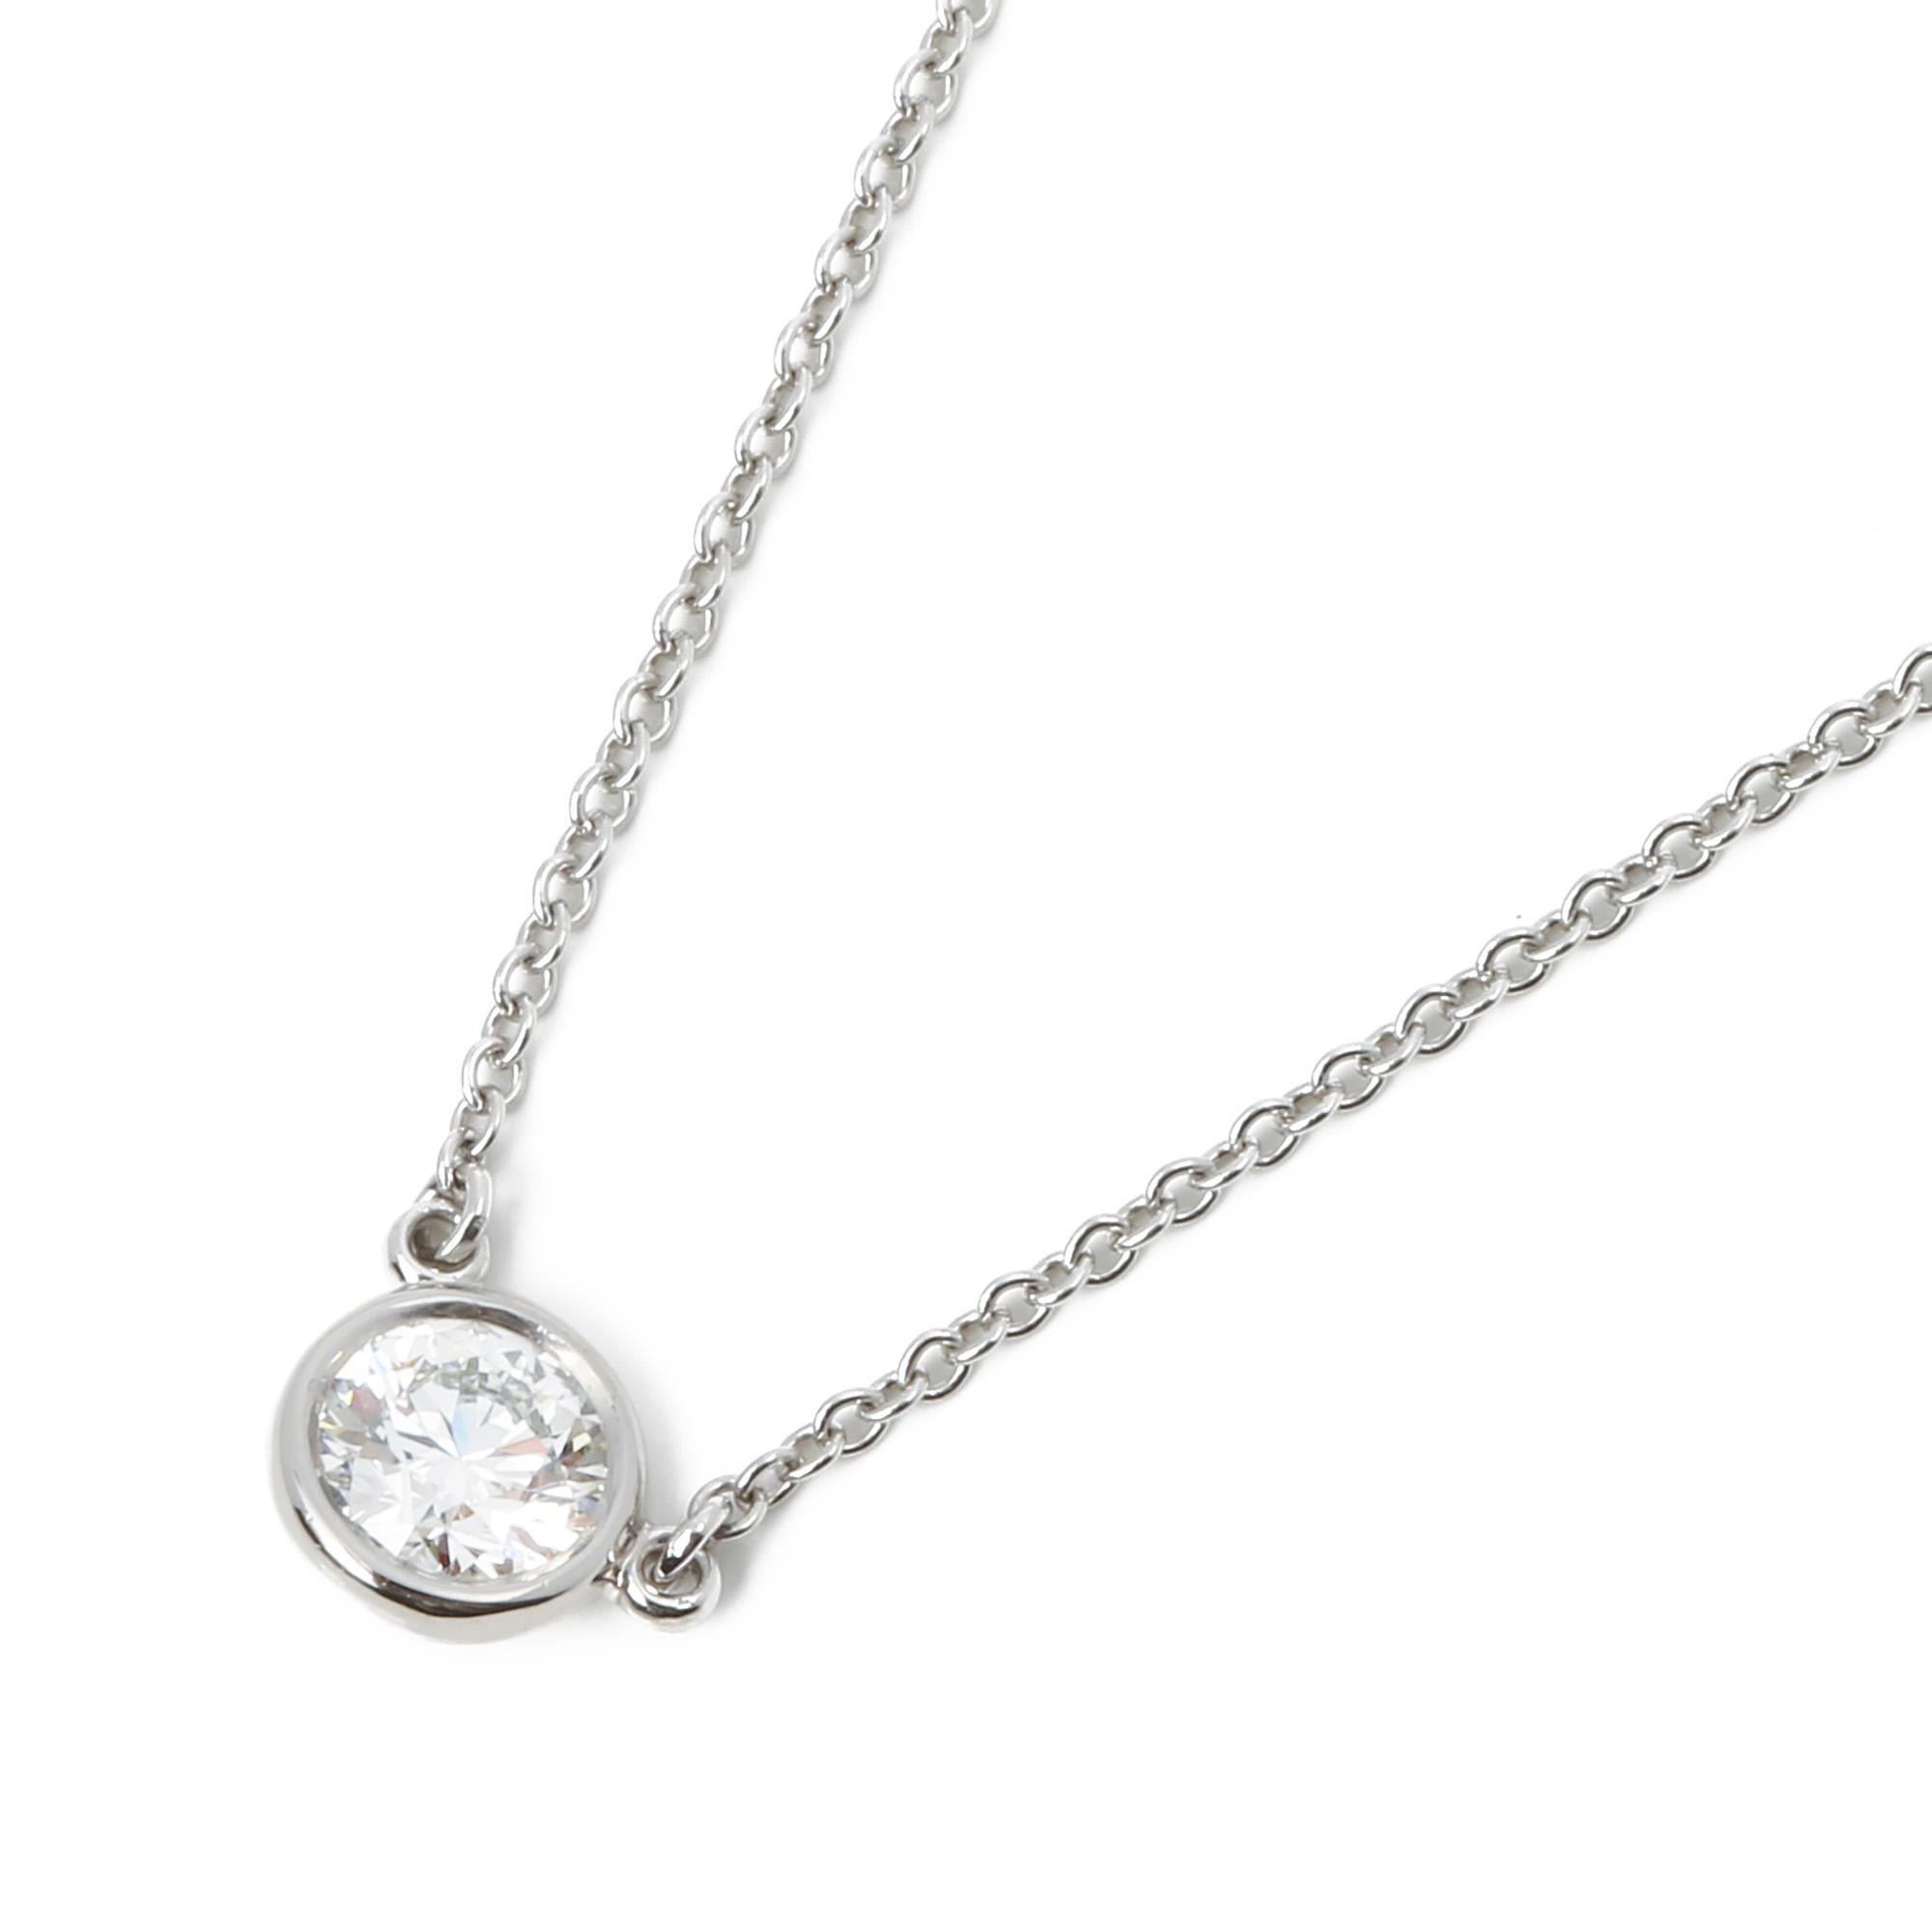 Contemporary Tiffany & Co. Diamonds by the Yard 0.35 Carat Pendant Necklace